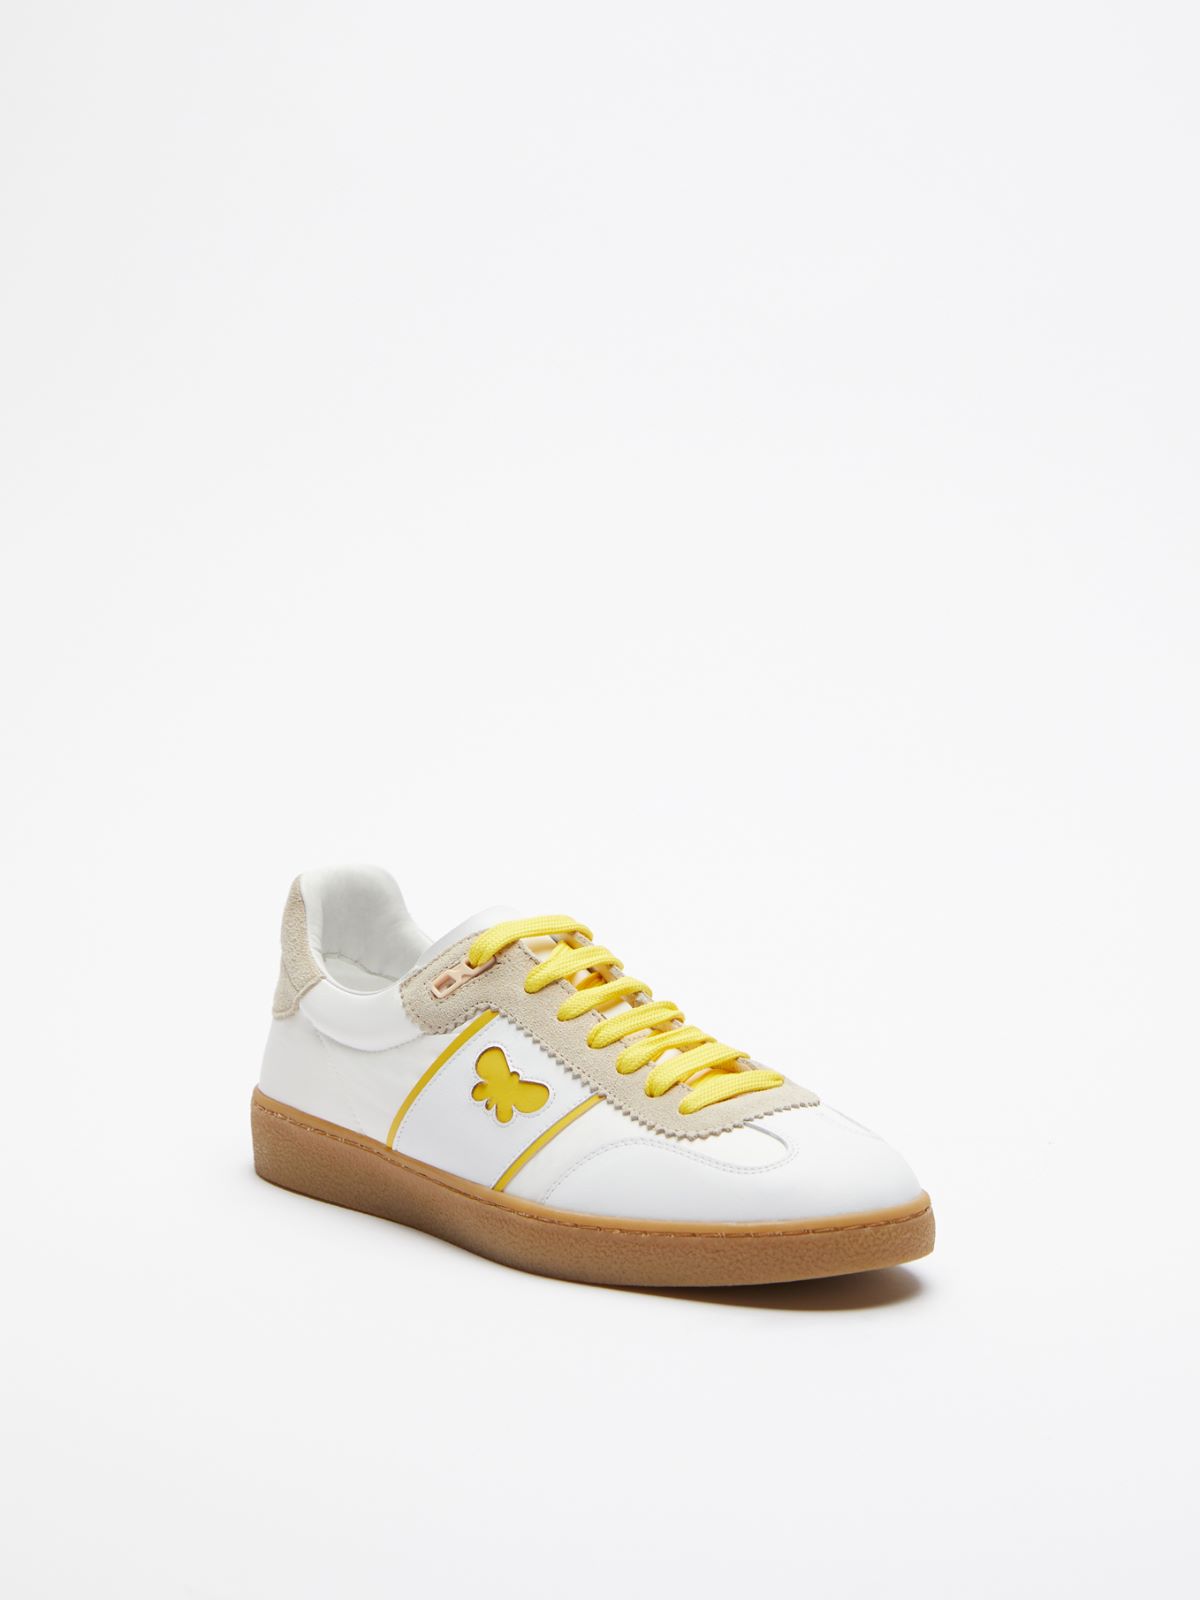 Trainers in technical fabric and leather - BRIGHT YELLOW - Weekend Max Mara - 2